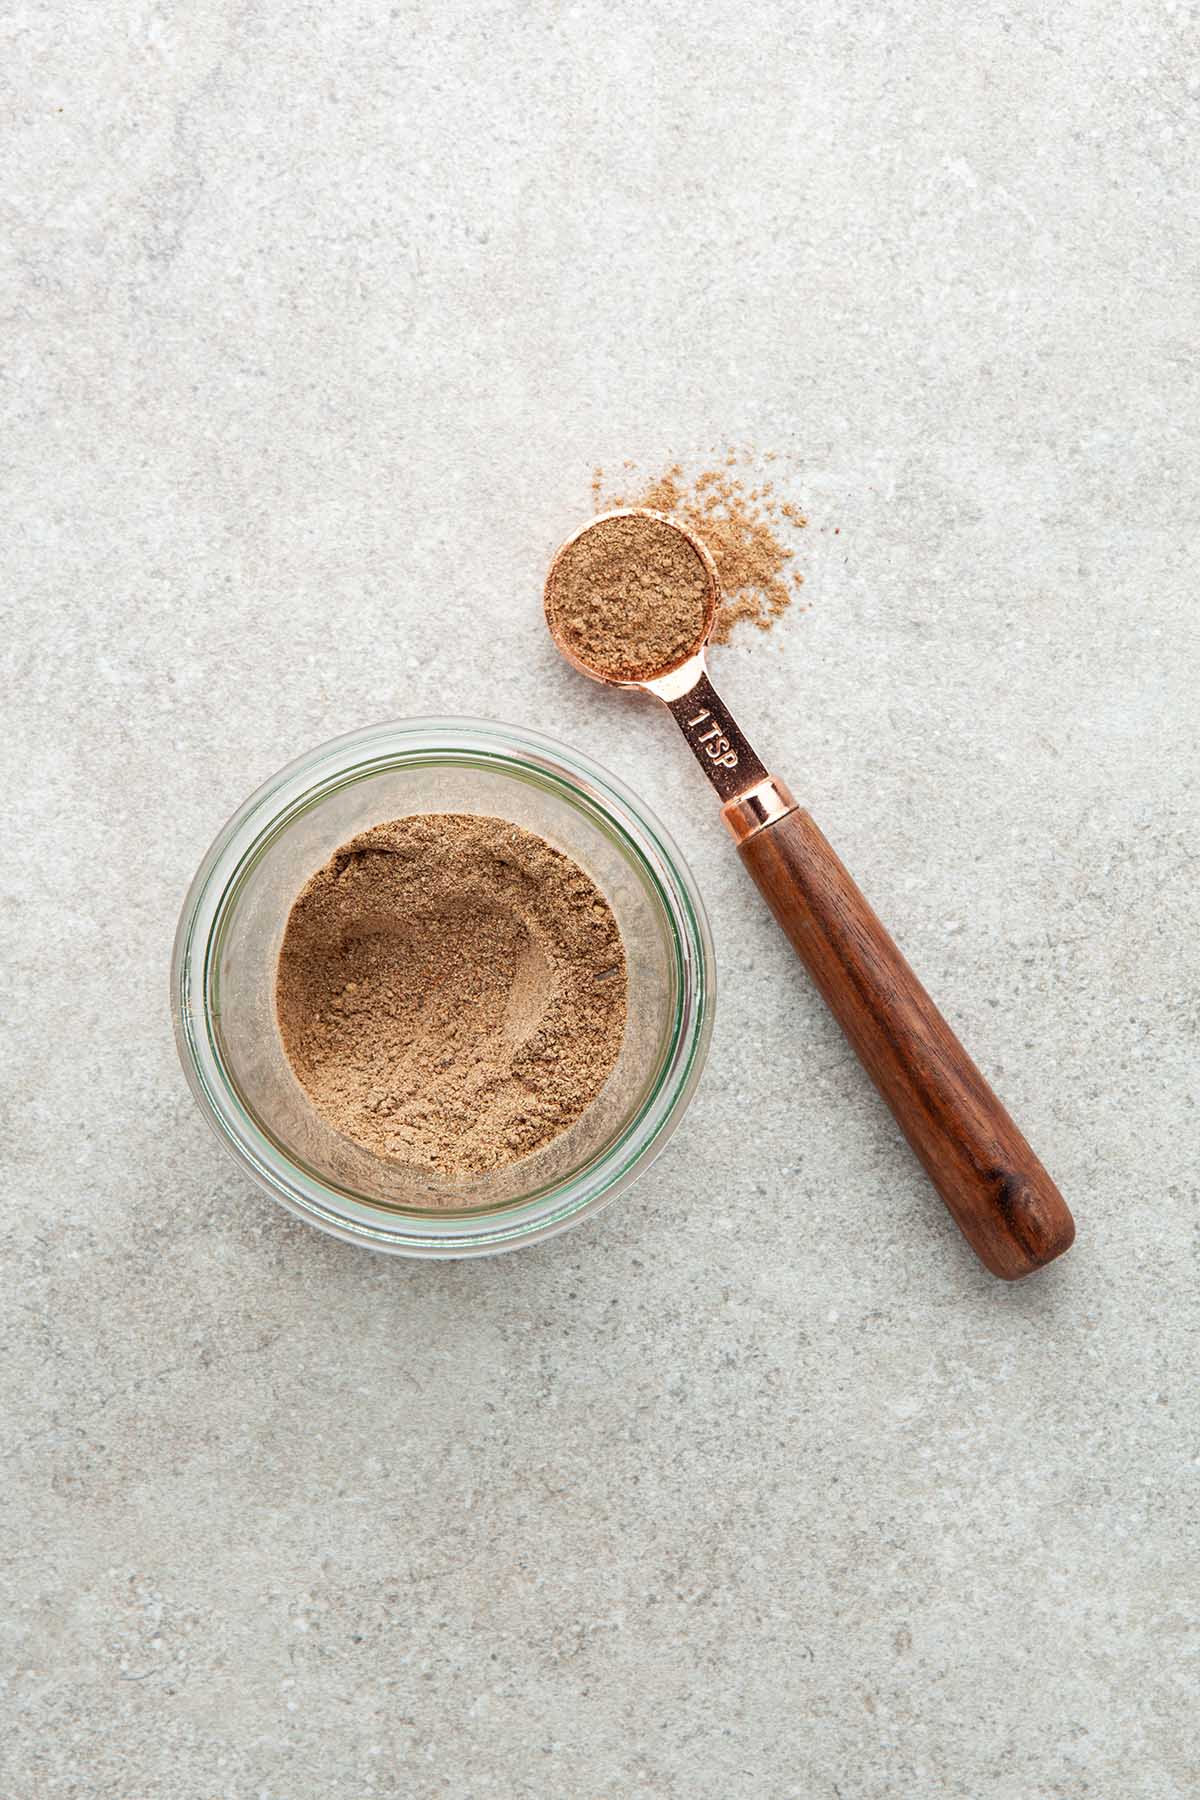 Homemade Chai Spice (+ 30 ways to use it) by Kelly Neil